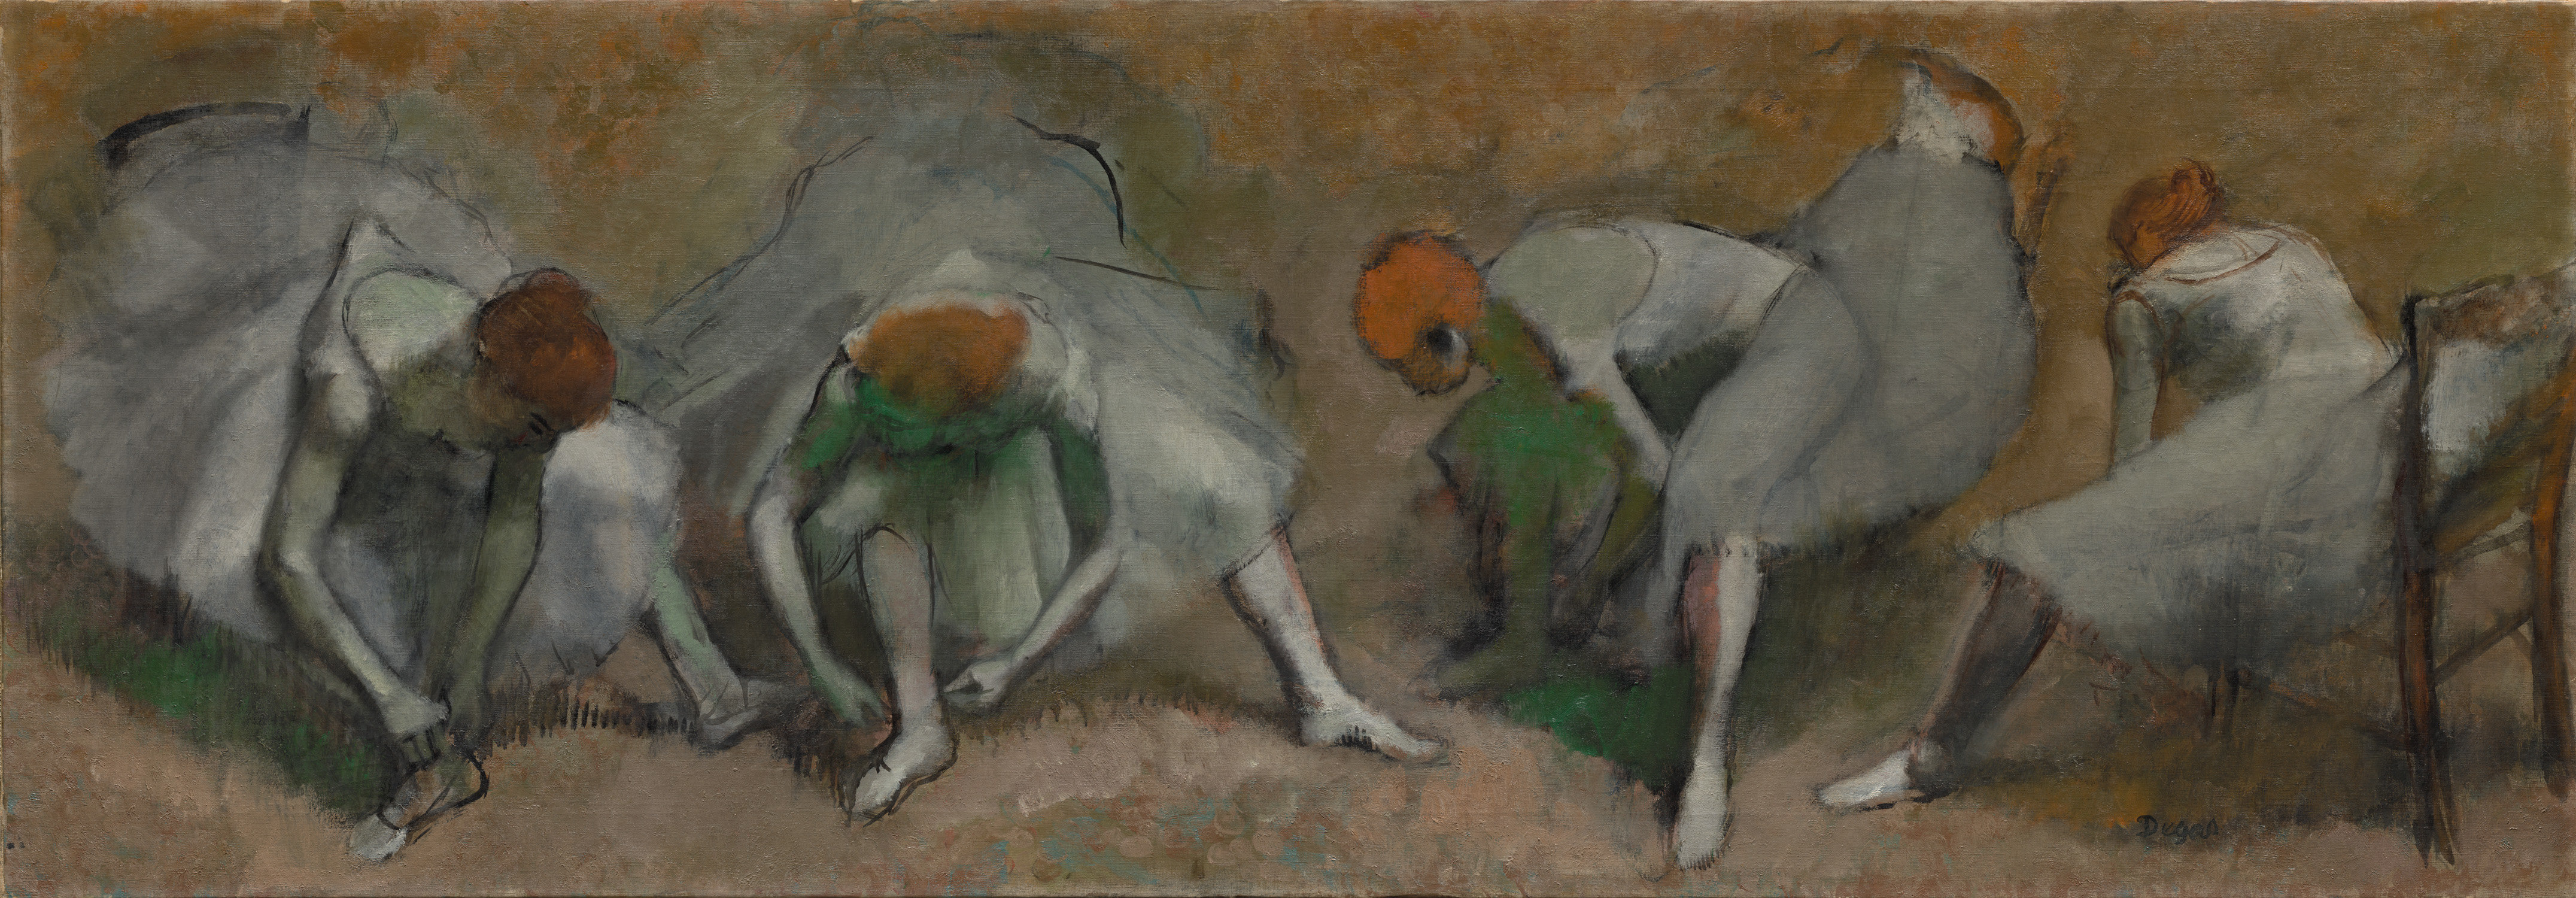 The Eternal Mystery Of Edgar Degas, A Man Obsessed With Dance HuffPost Entertainment